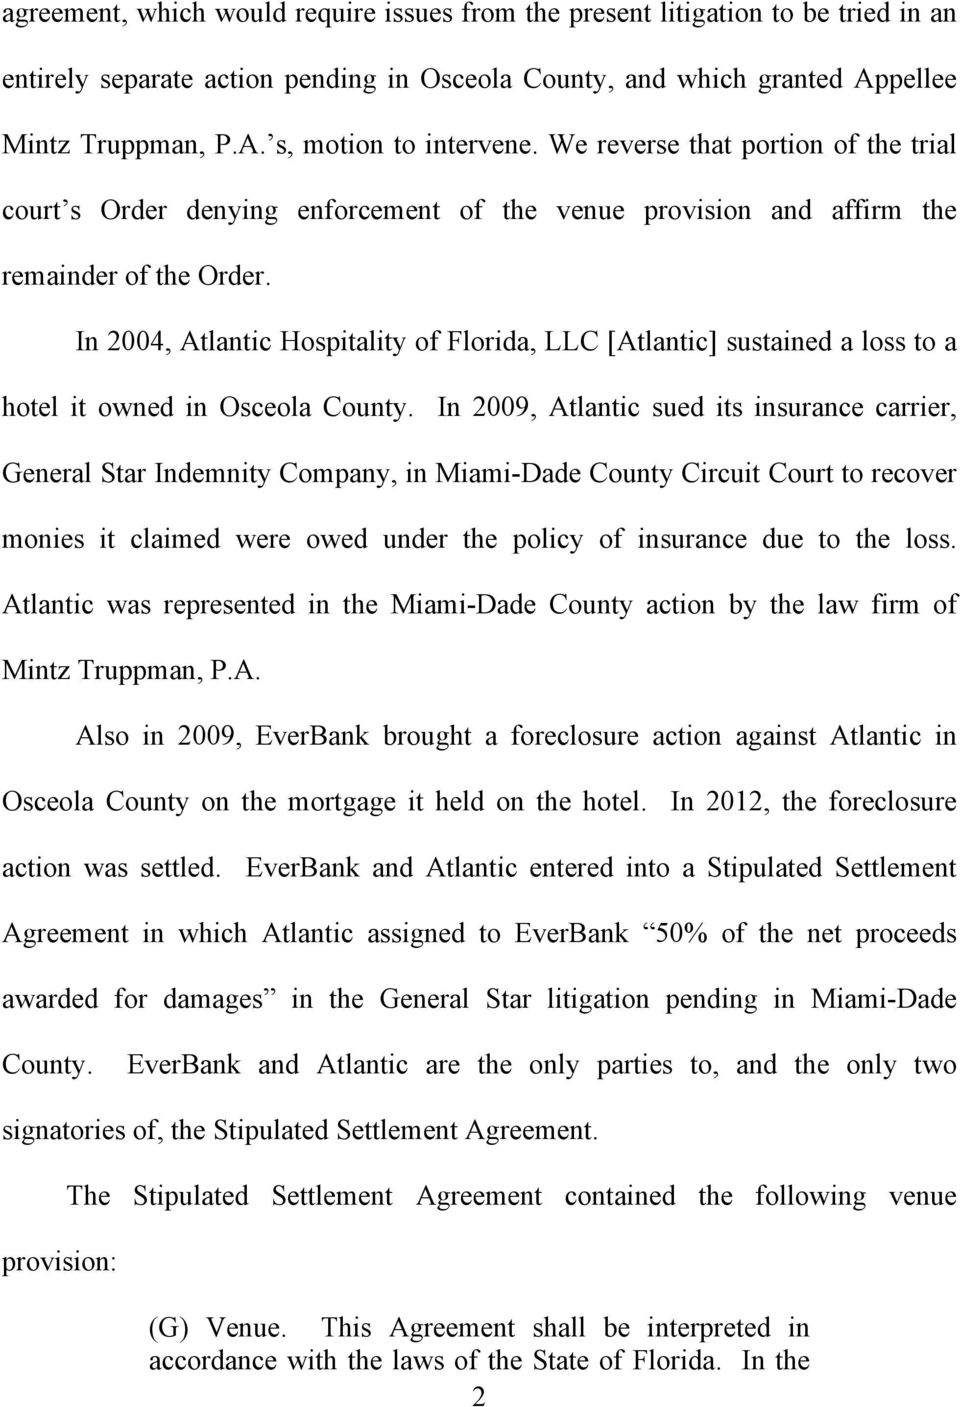 In 2004, Atlantic Hospitality of Florida, LLC [Atlantic] sustained a loss to a hotel it owned in Osceola County.